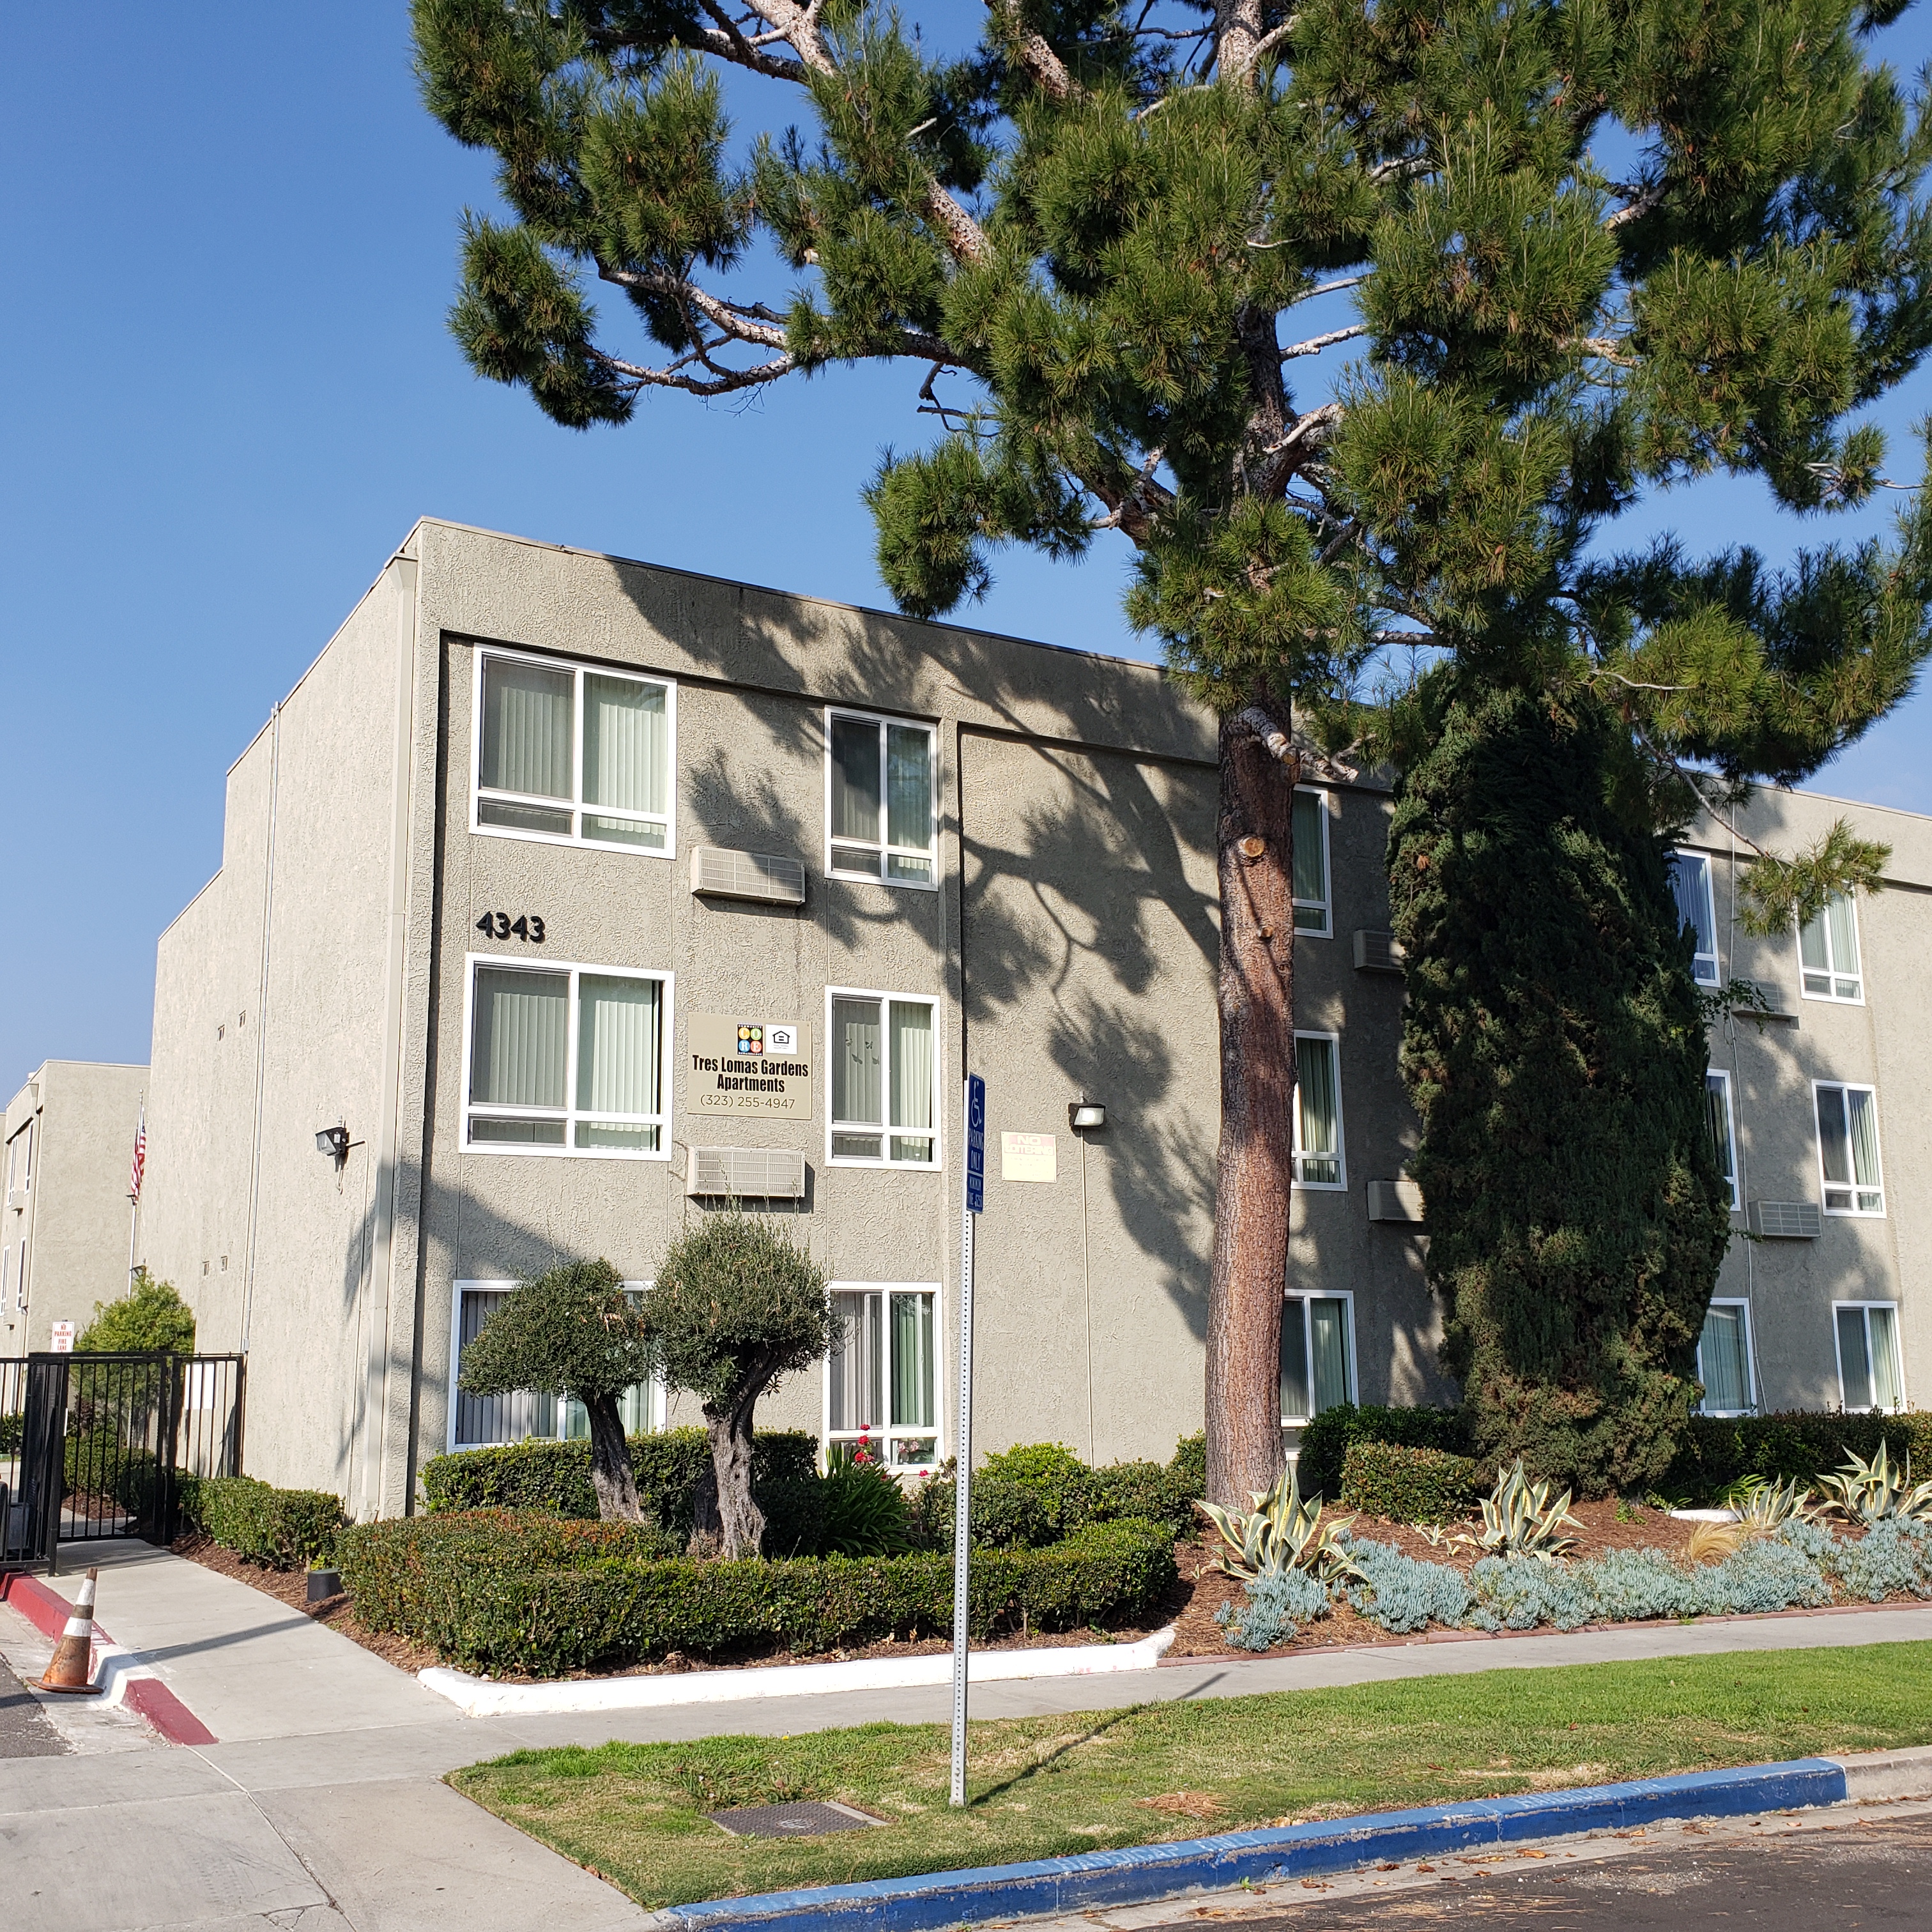 Front view of tres lomas garden apartments. multi-story building with large trees, bushes and grass in the front. Section of curb on street is painted blue with parking accessibility sign.